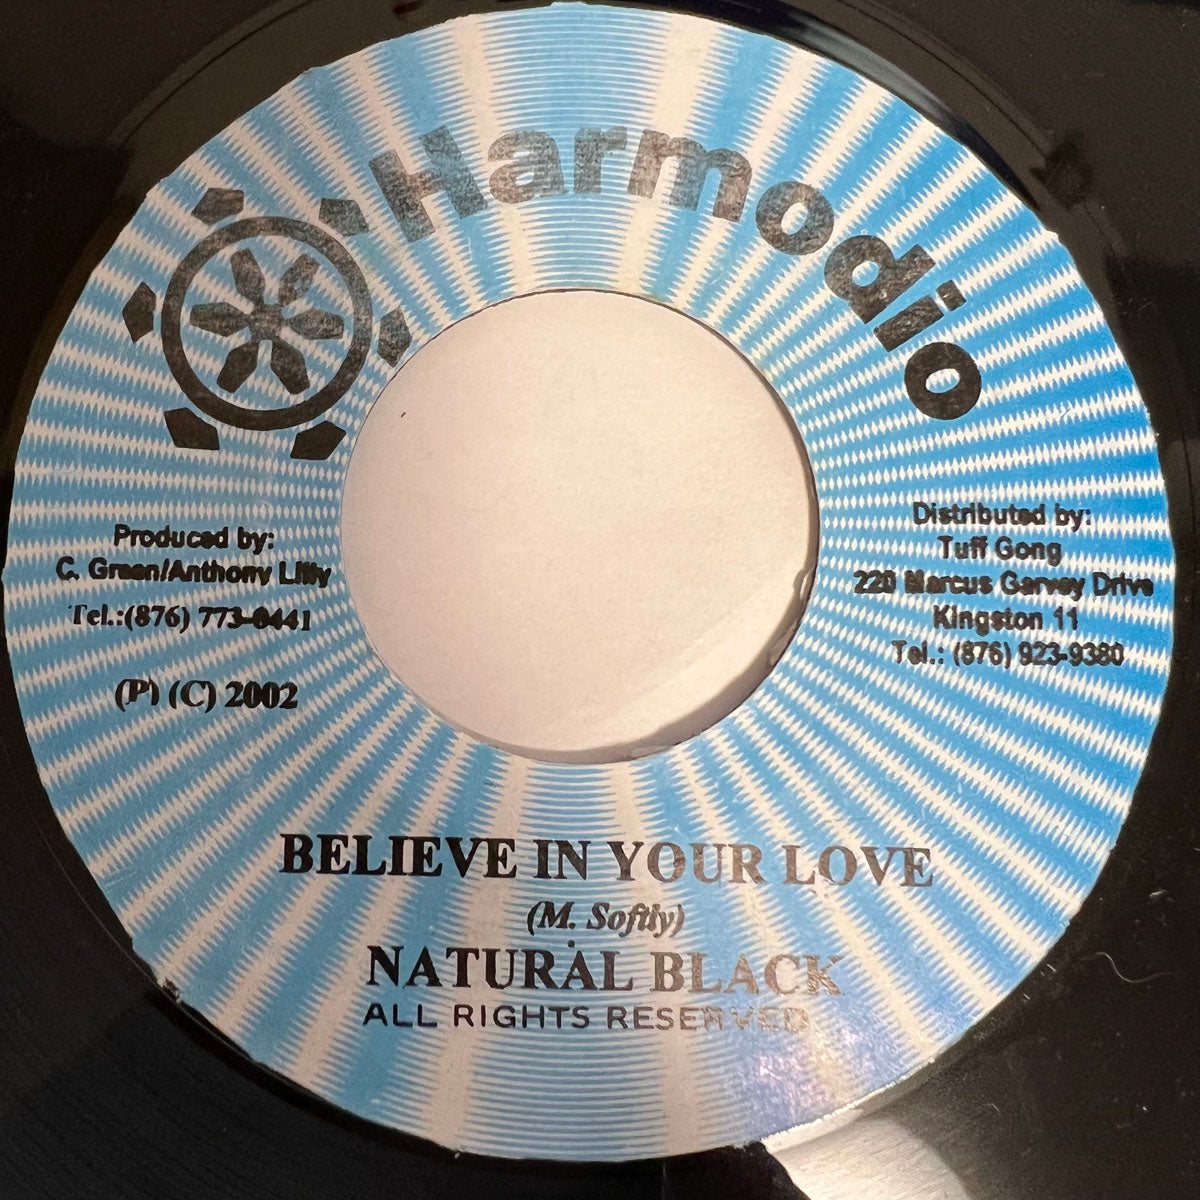 NATURAL BLACK / BELIEVE IN YOUR LOVE